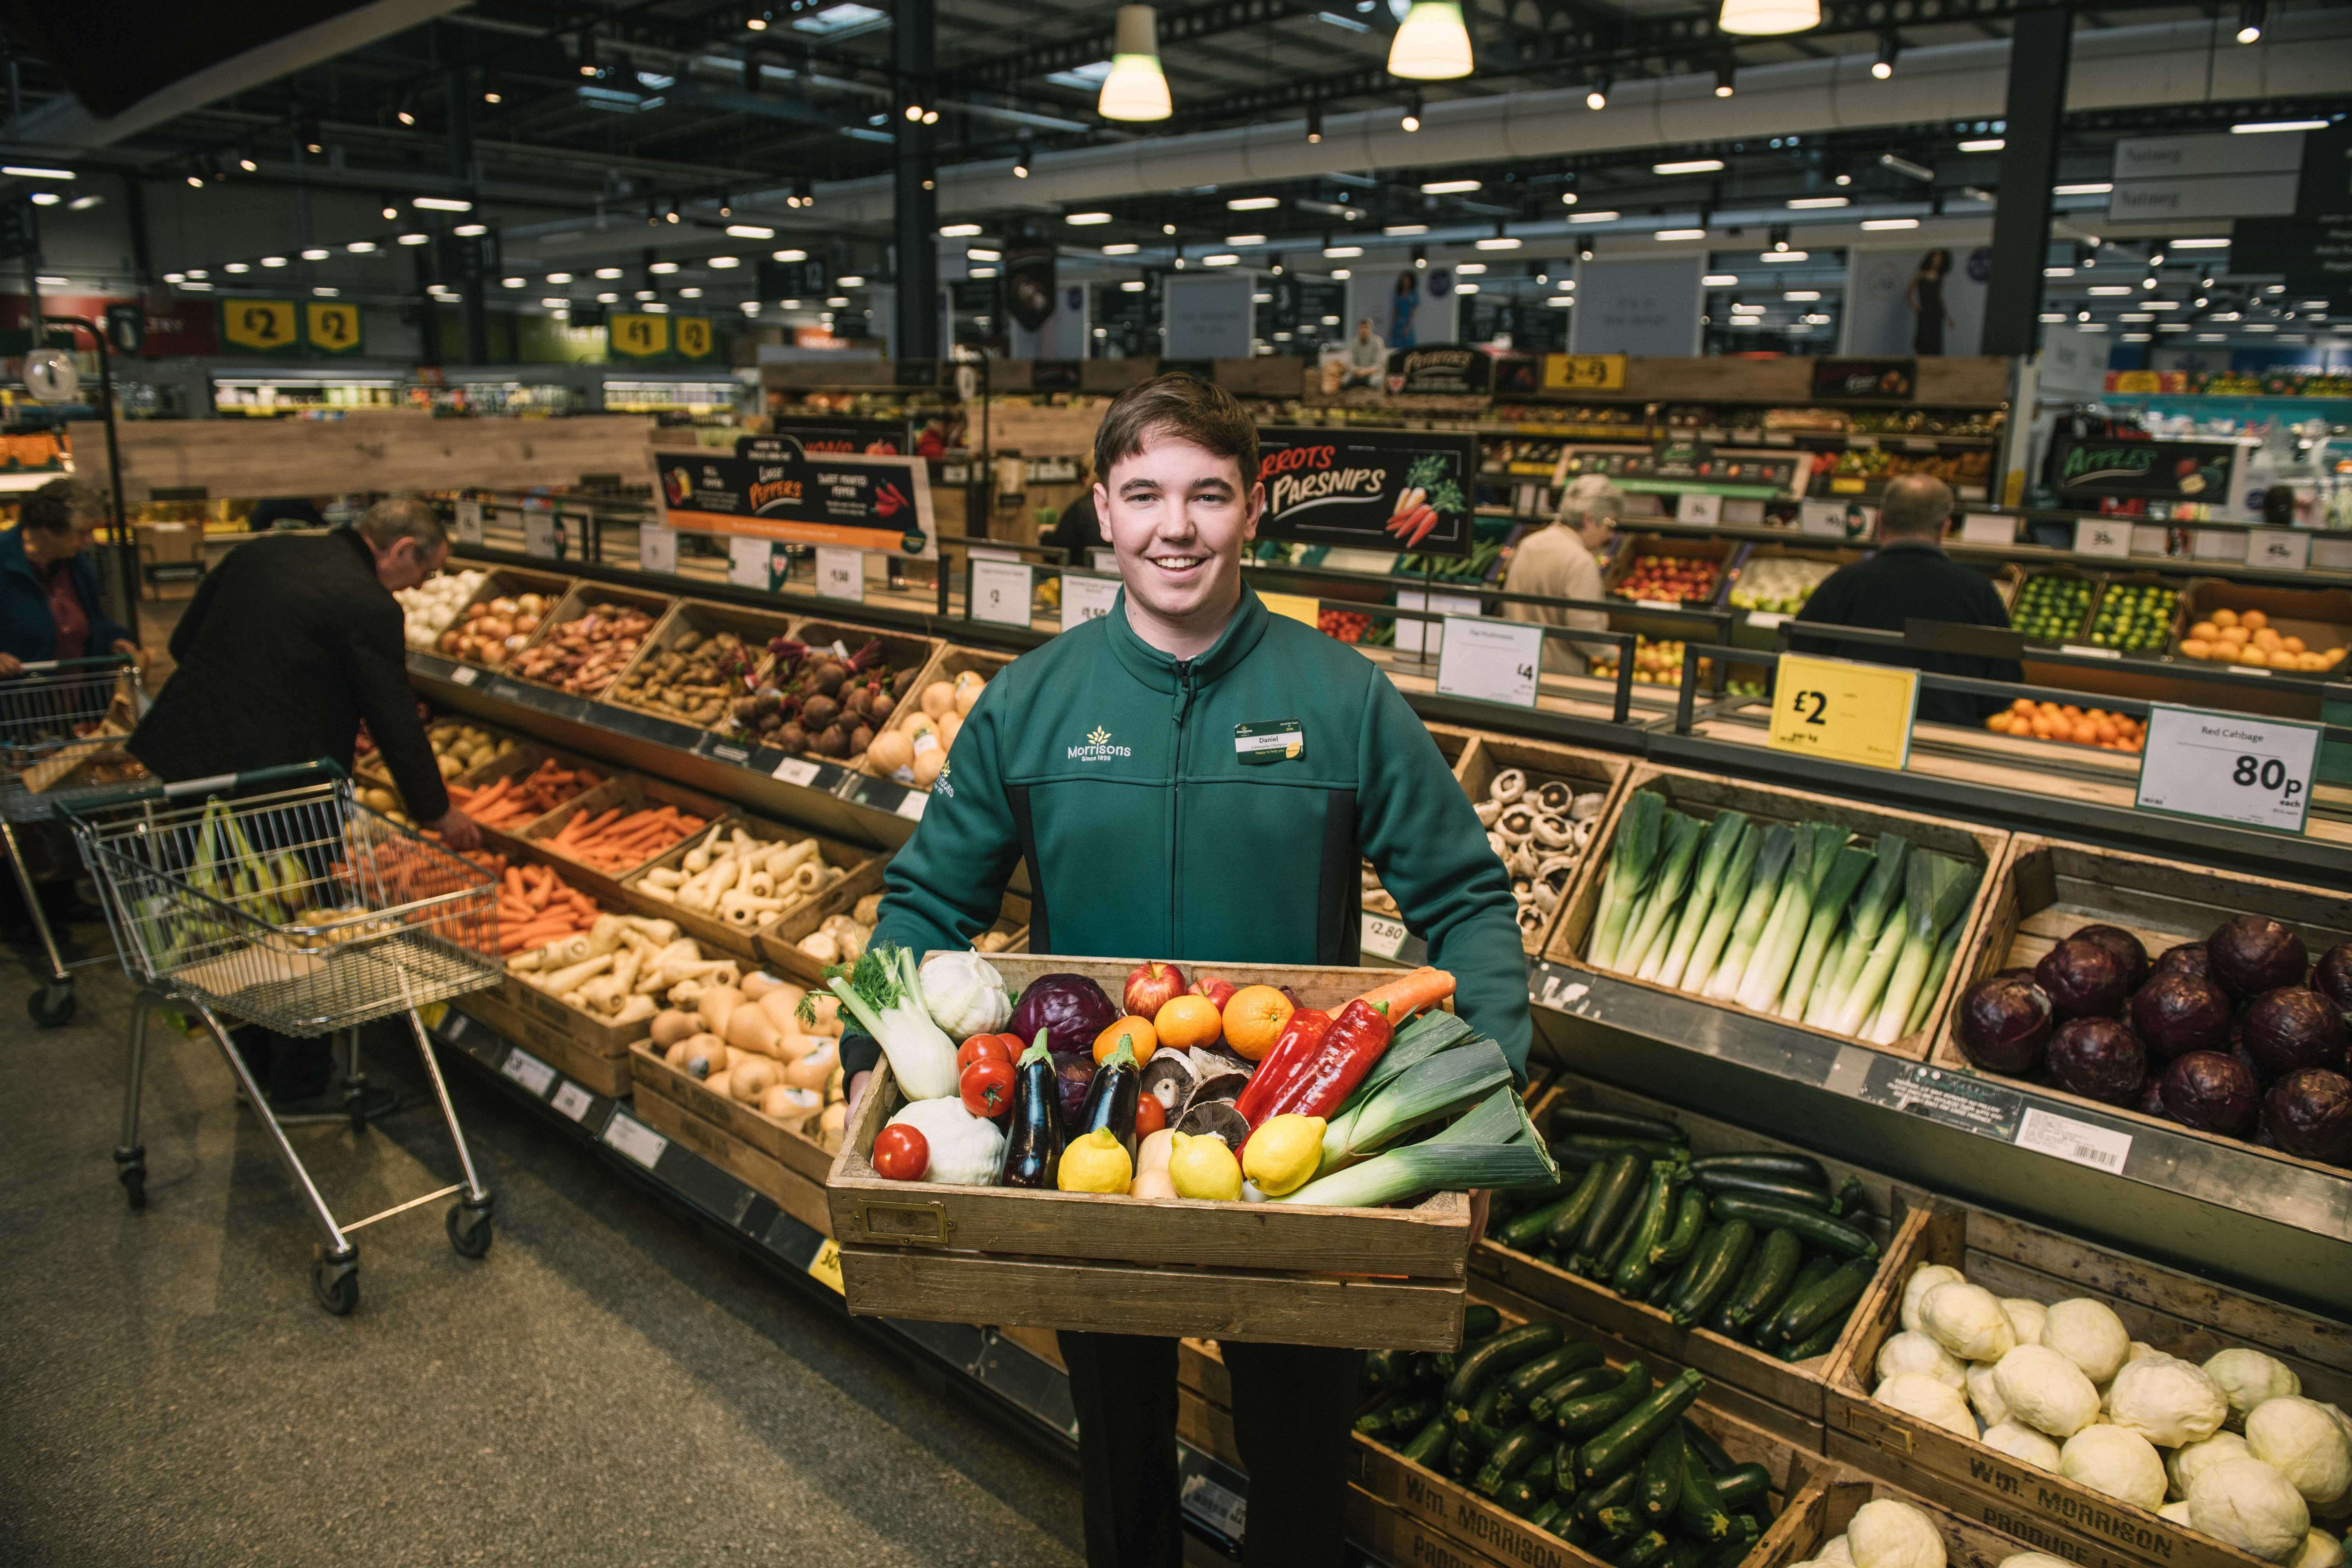 Morrisons to introduce plastic-free fruit and veg areas to help customers buy bagless